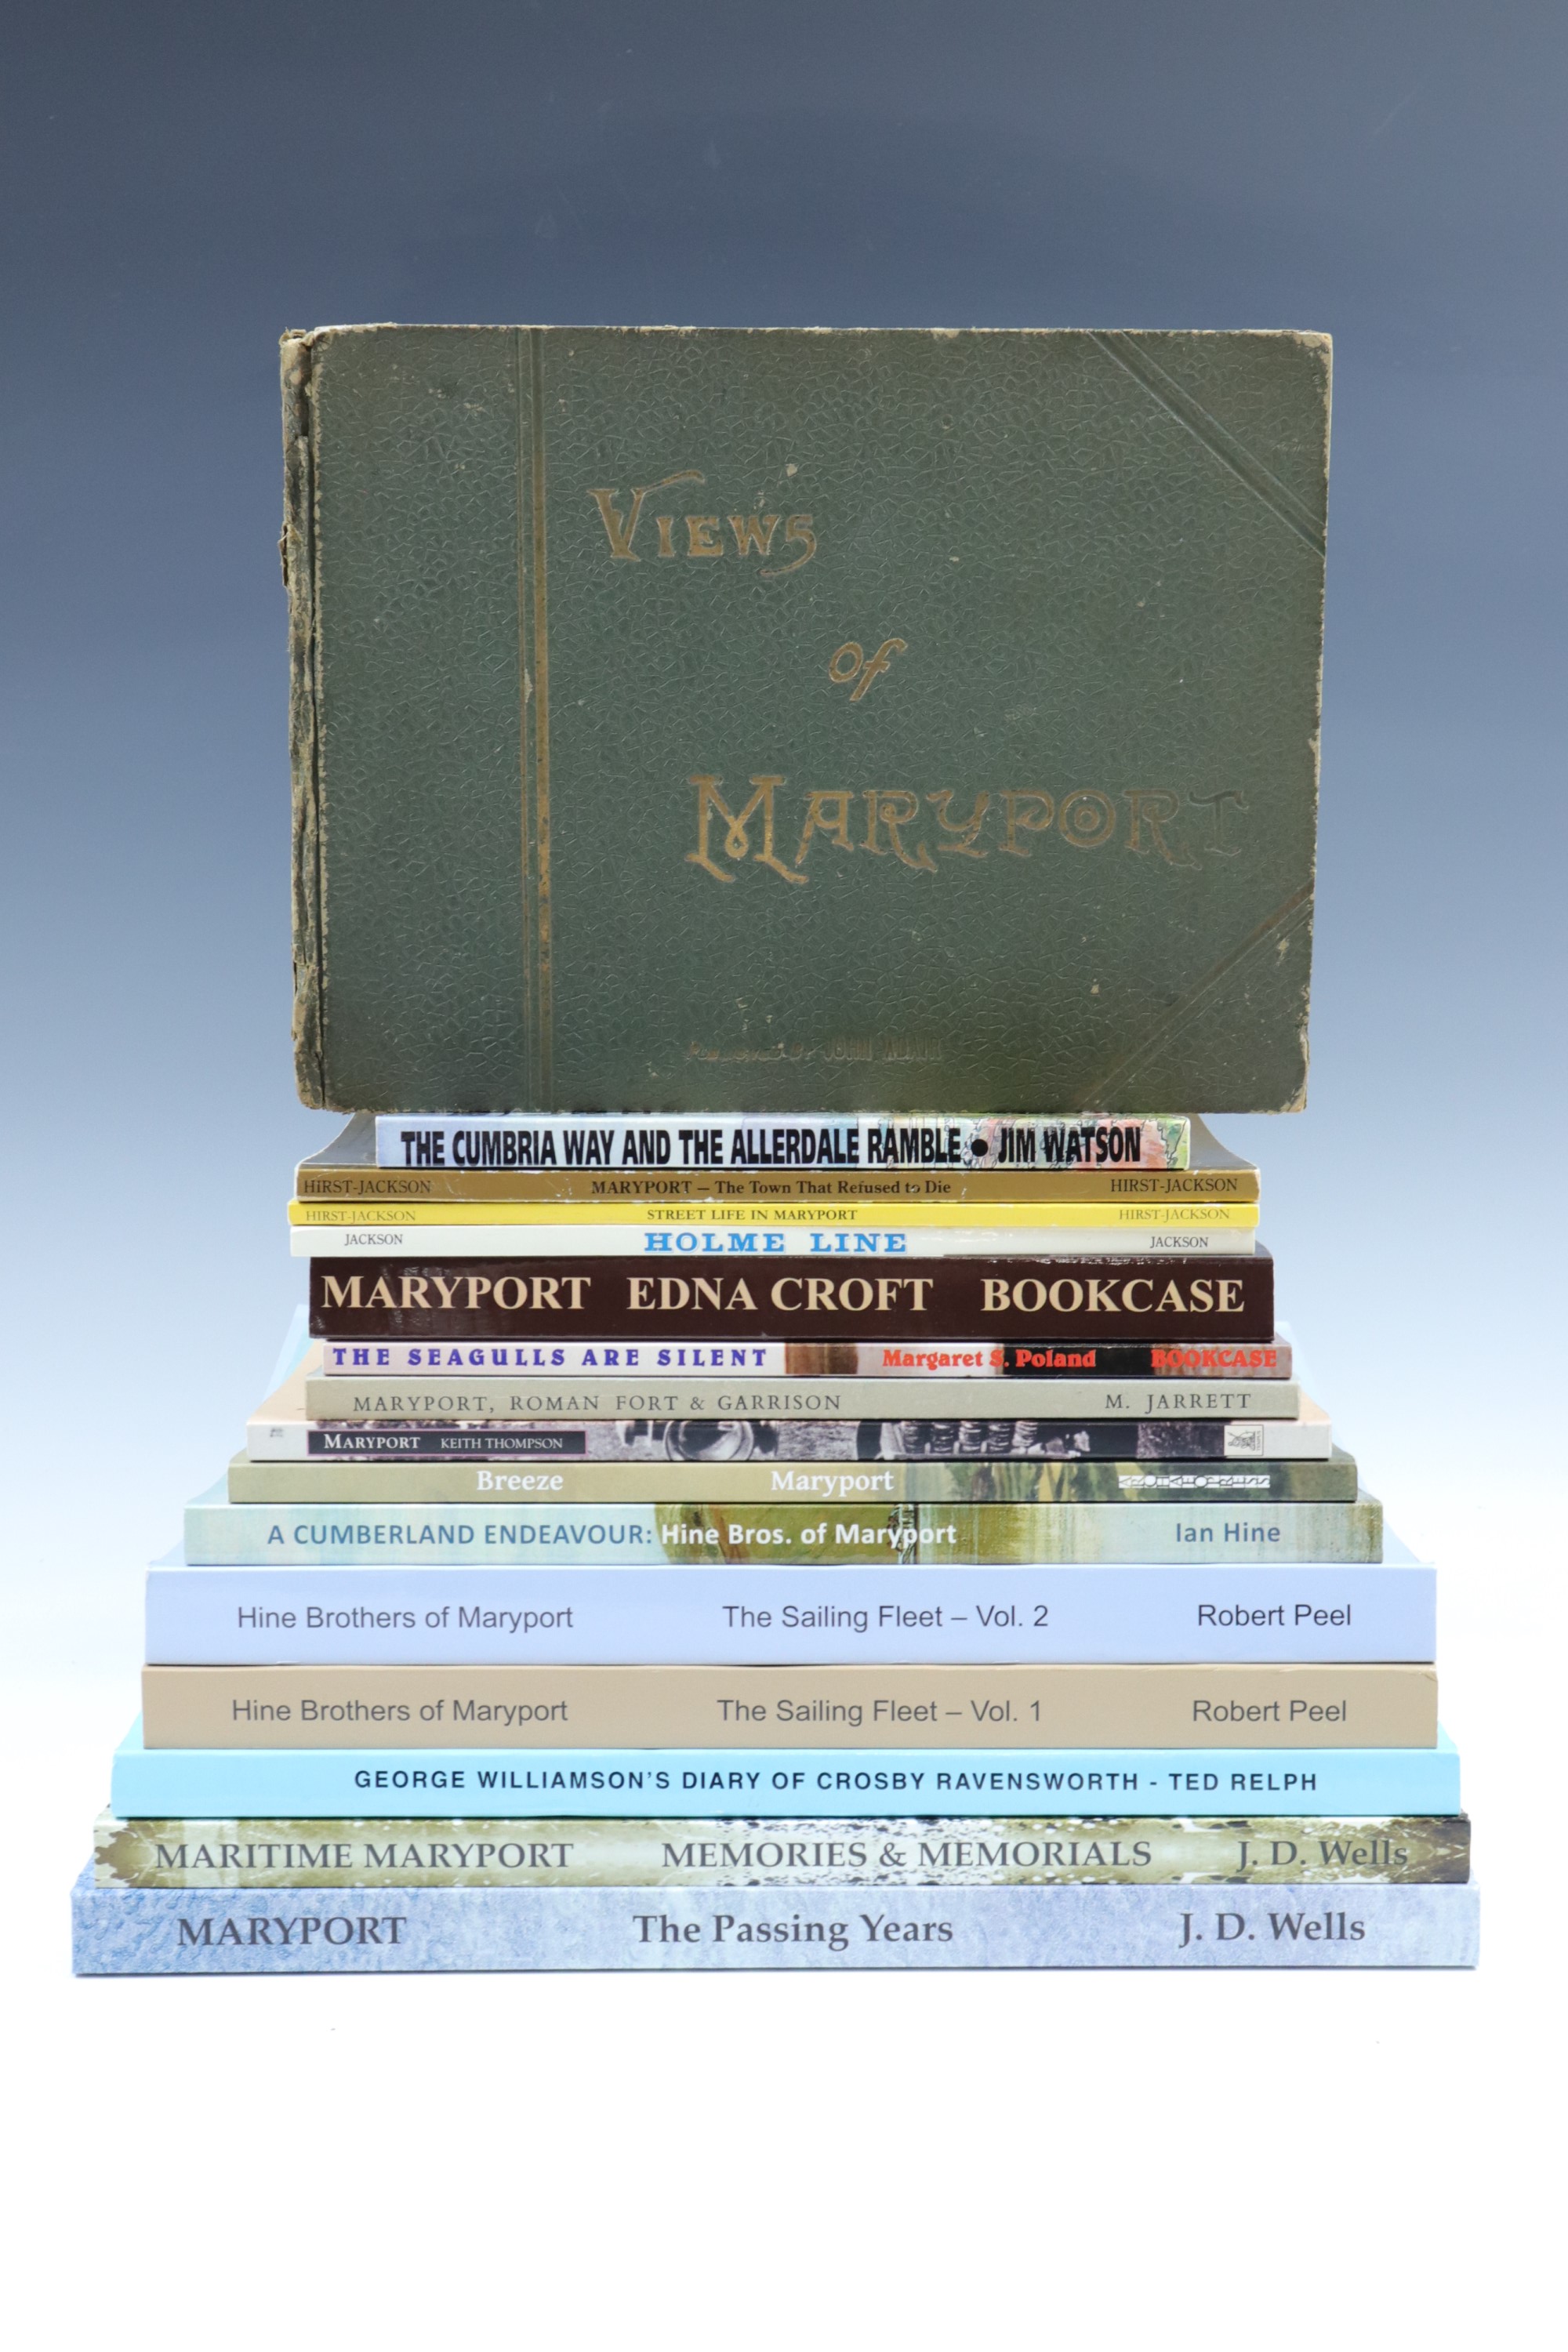 A quantity of books and guides relating to Maryport and its maritime past, Dearham, Allerdale, etc